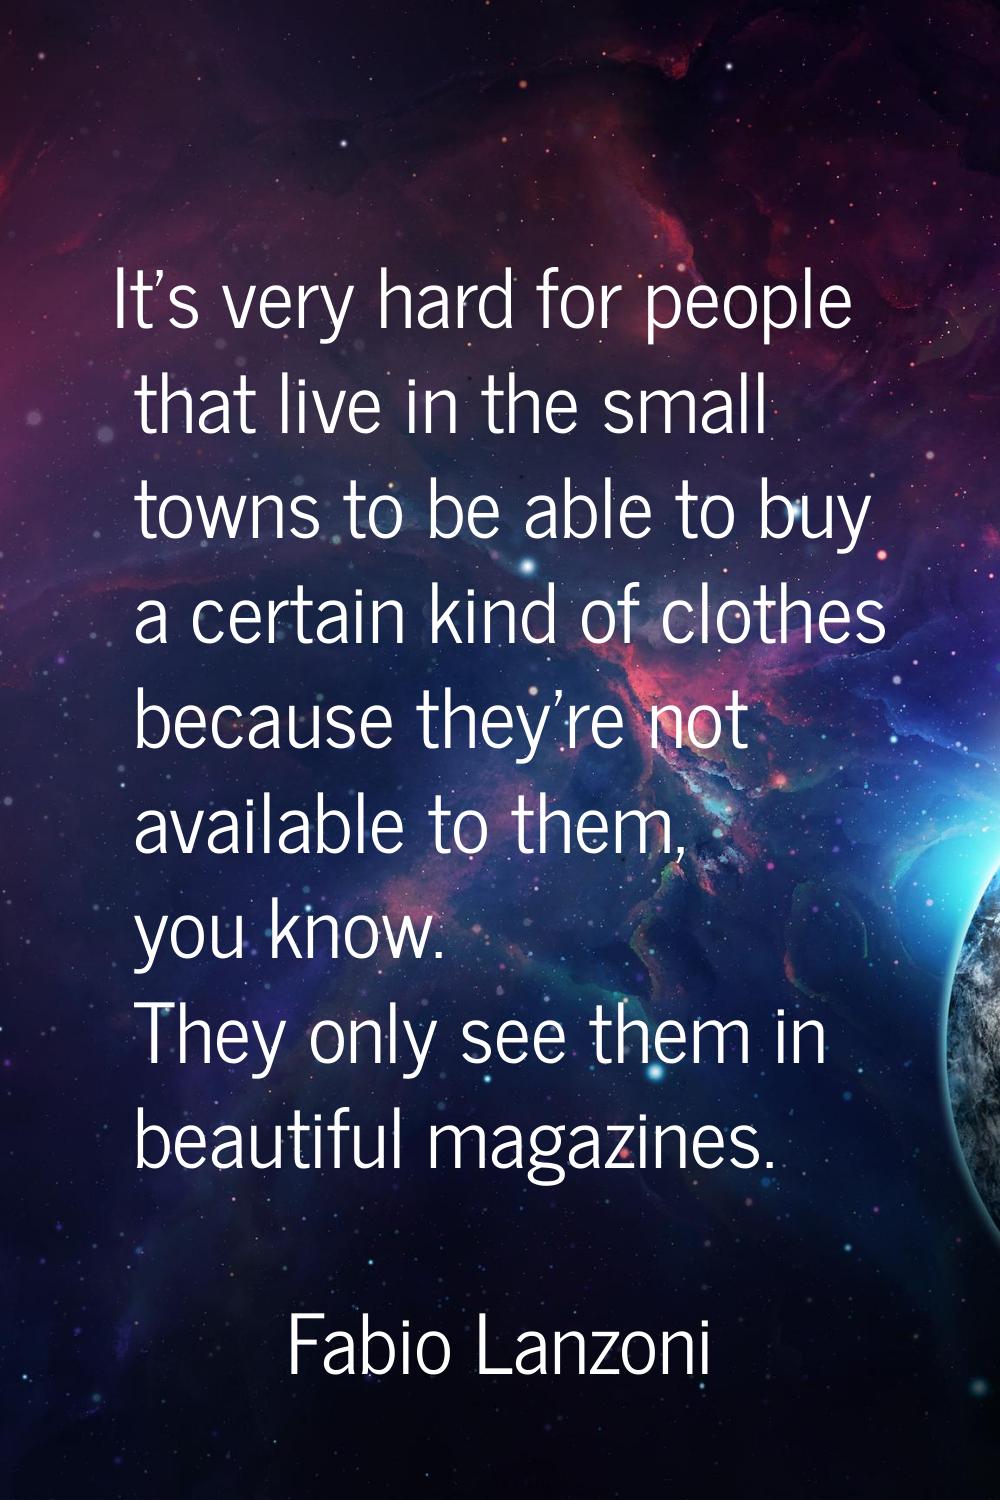 It's very hard for people that live in the small towns to be able to buy a certain kind of clothes 